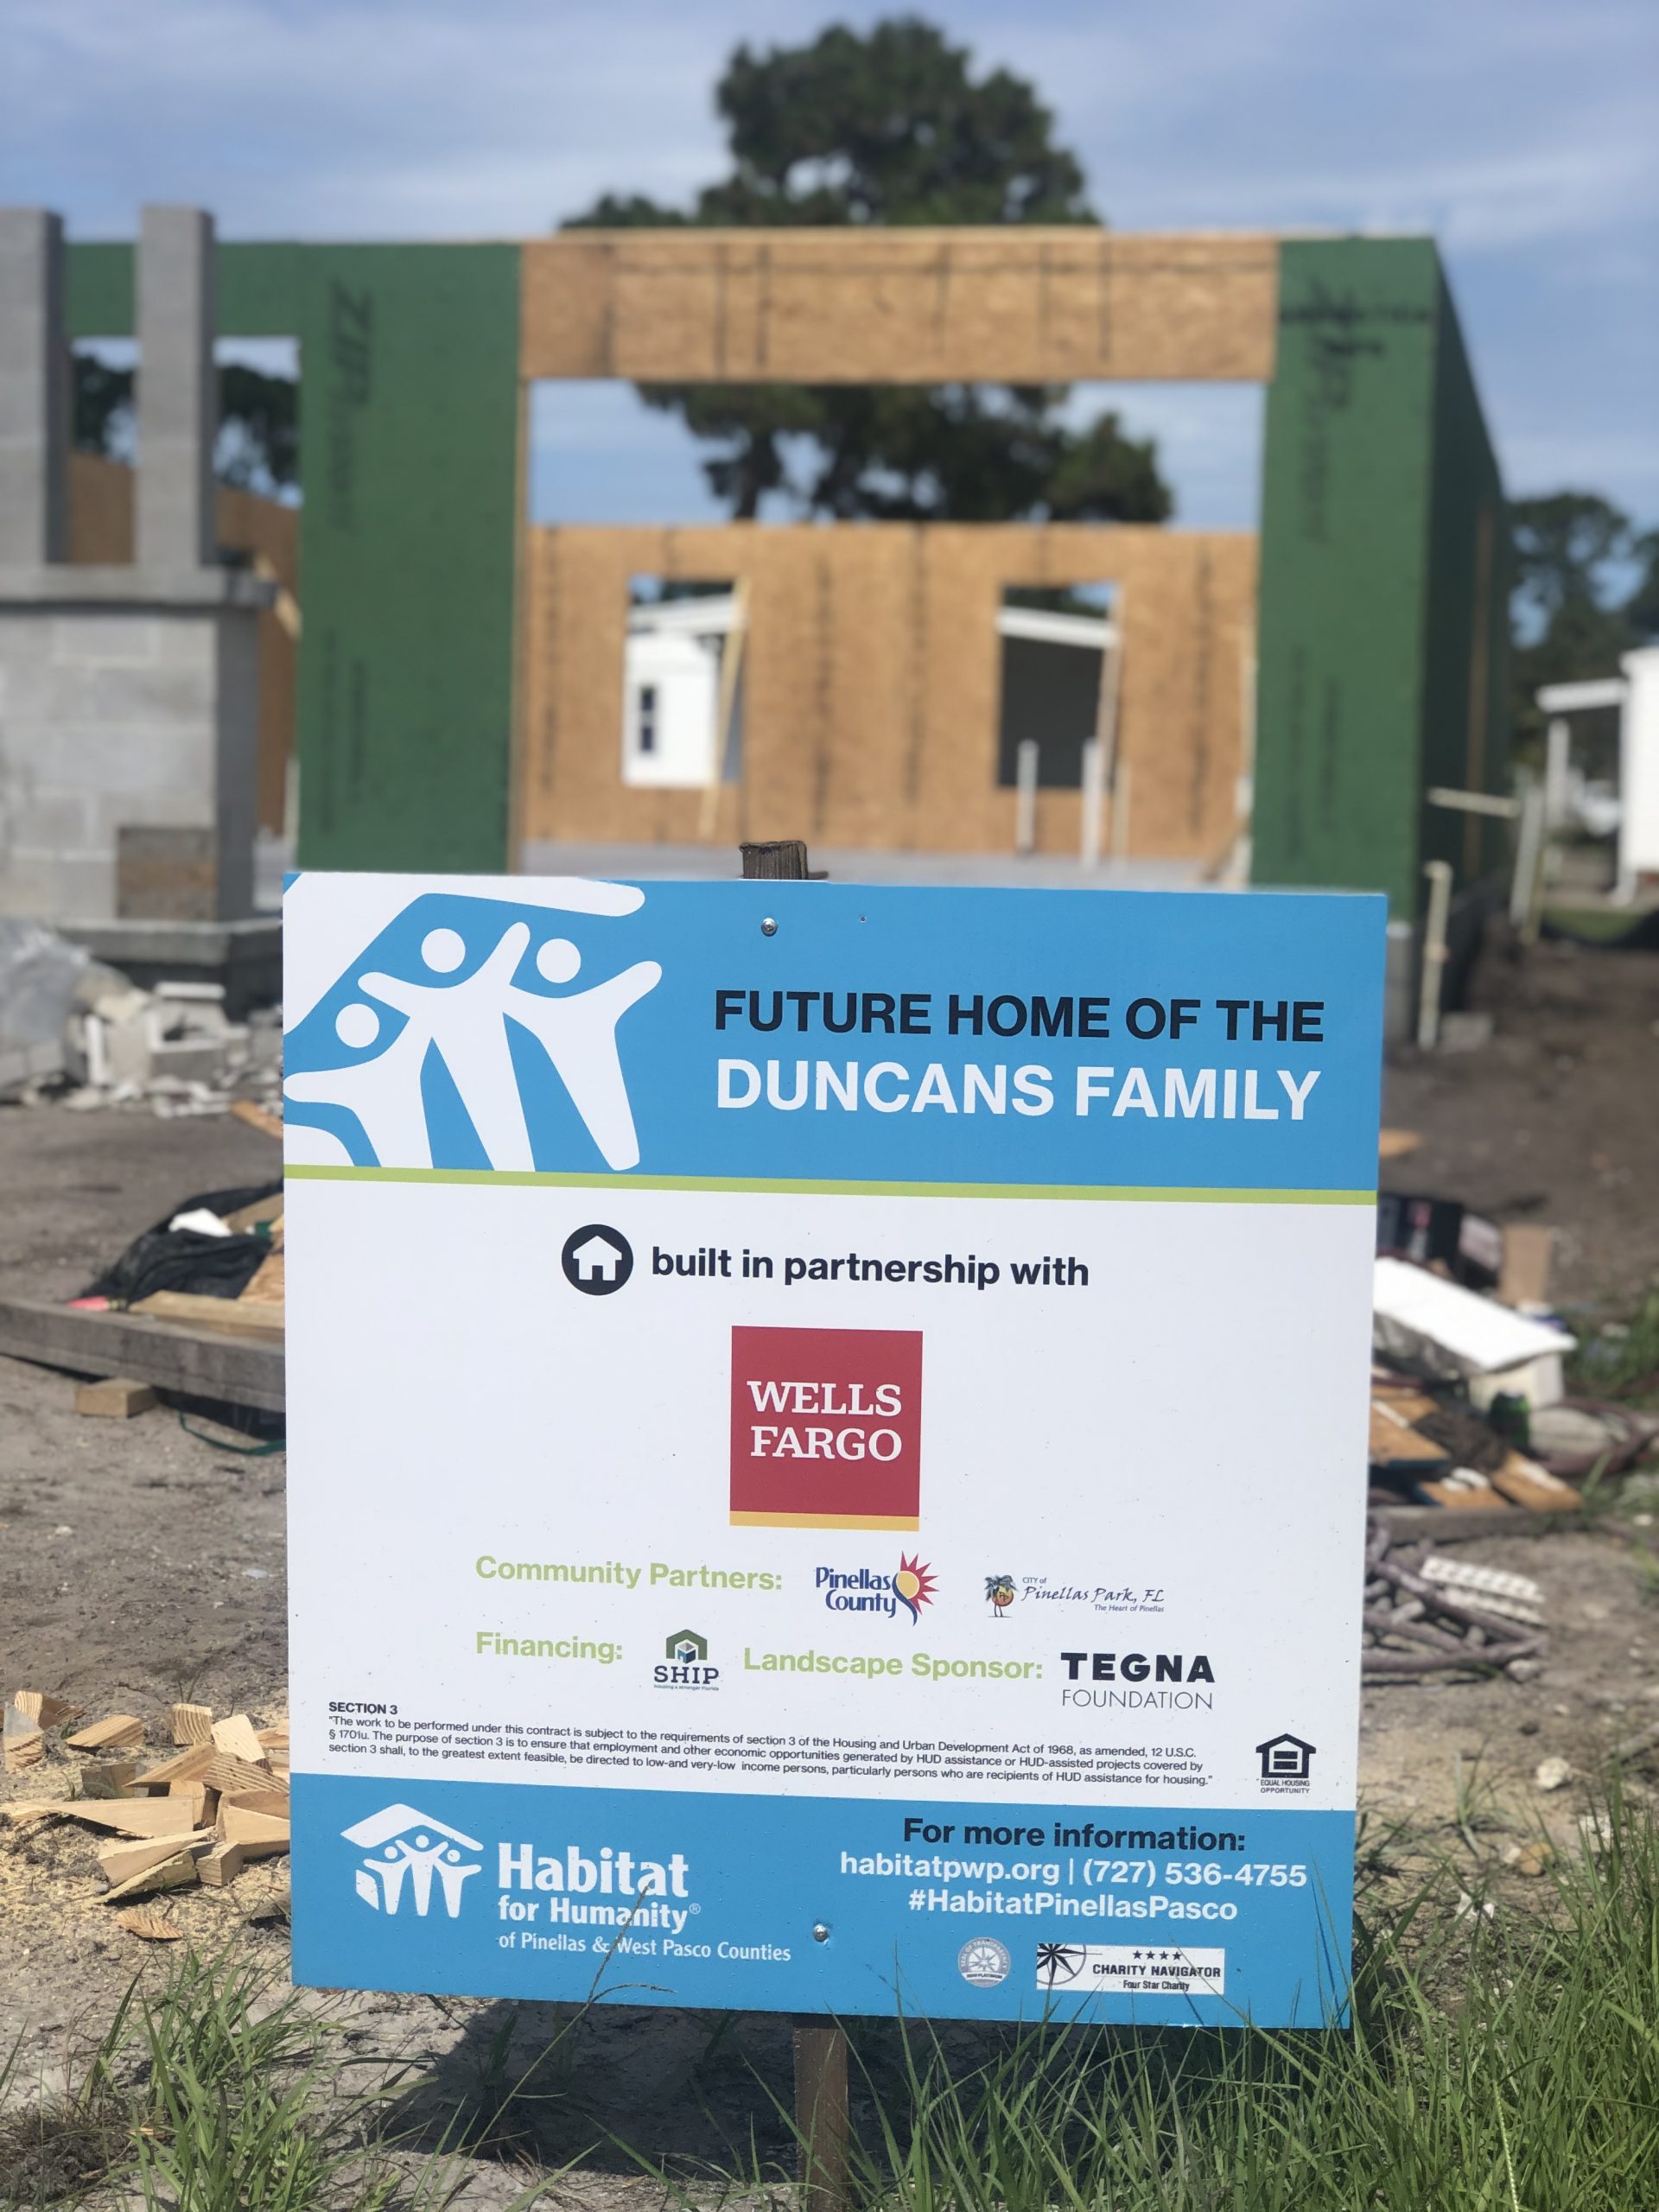 Wells Fargo donates $45,000 to Habitat for Humanity of Pinellas and West Pasco Counties to help more families in access decent, affordable housing